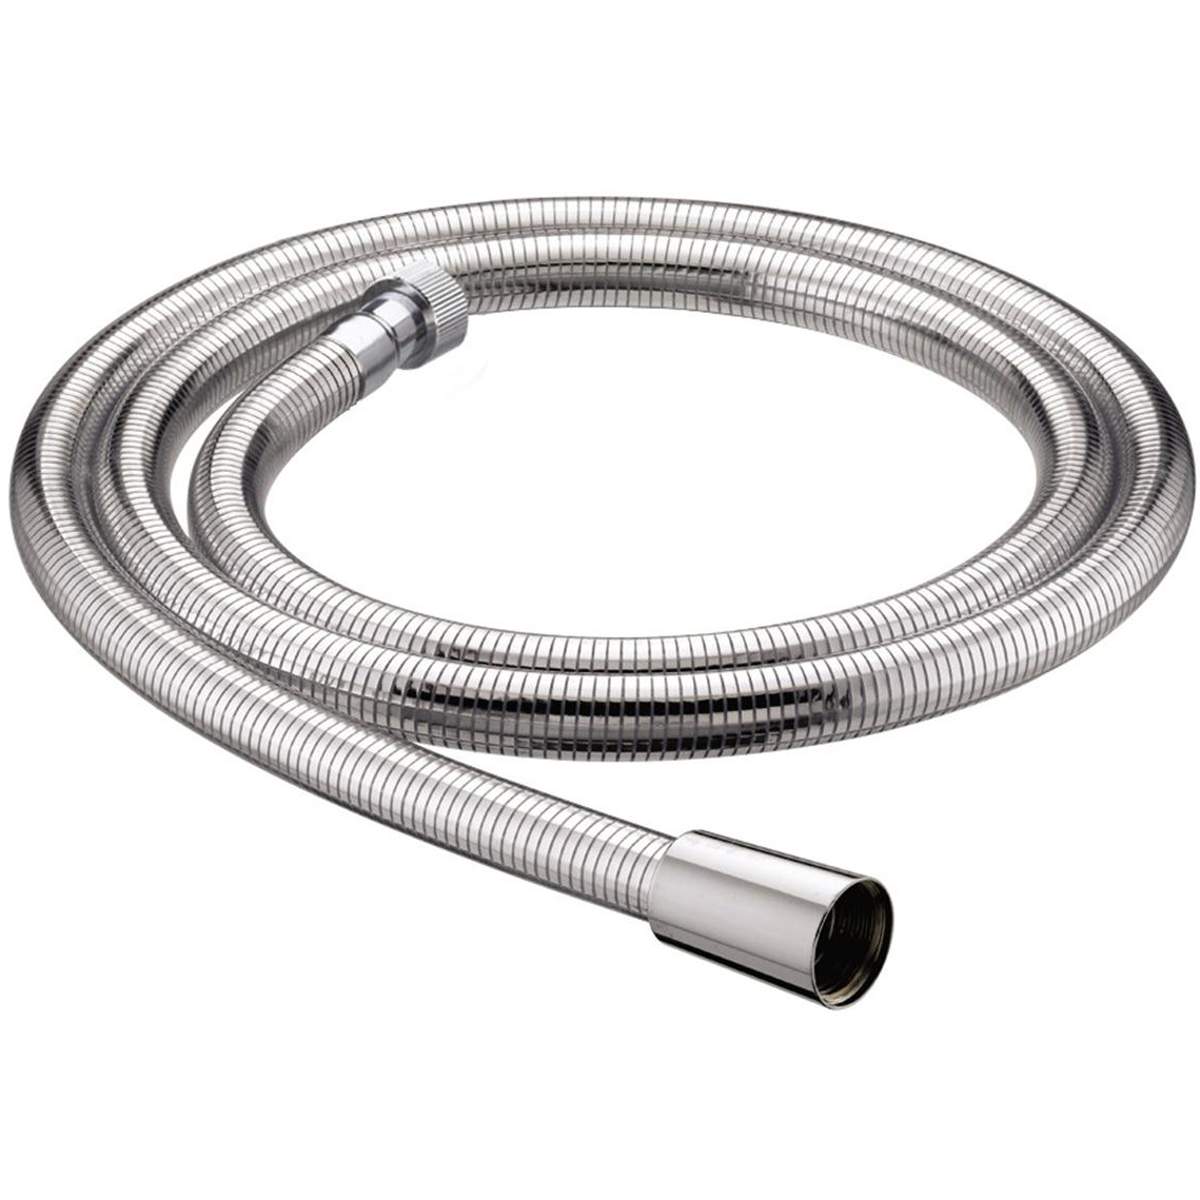 Bristan 1.5m Cone to Nut Easy Clean Shower Hose with 11mm Bore (HOS 150CNE02 C)